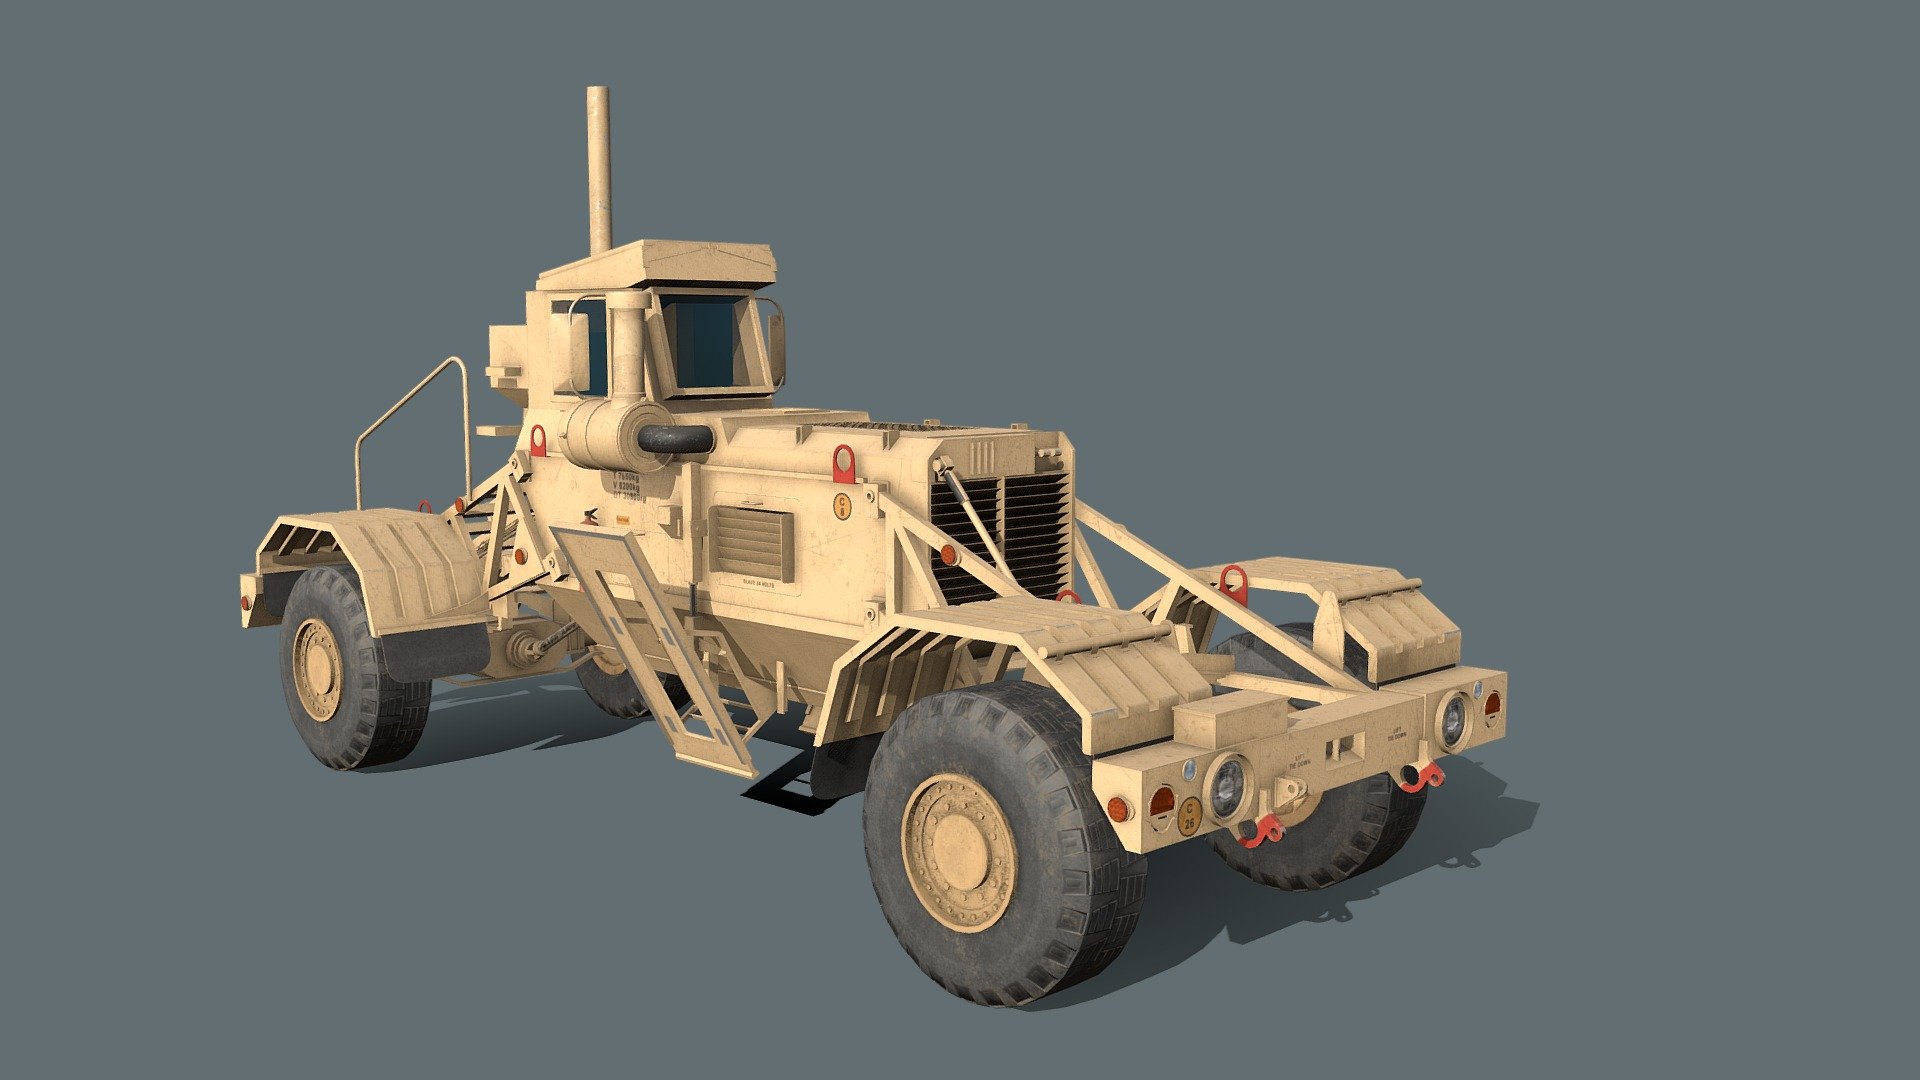 The Husky VMMD (Vehicle-Mounted Mine Detection) is a South African configurable counter-IED MRAP designed for route clearance and demining. It is designed to assist in the disposal of land mines and improvised explosive devices.
The Husky is manufactured in South Africa by DCD Protected Mobility and American C-IED company Critical Solutions International 3d model